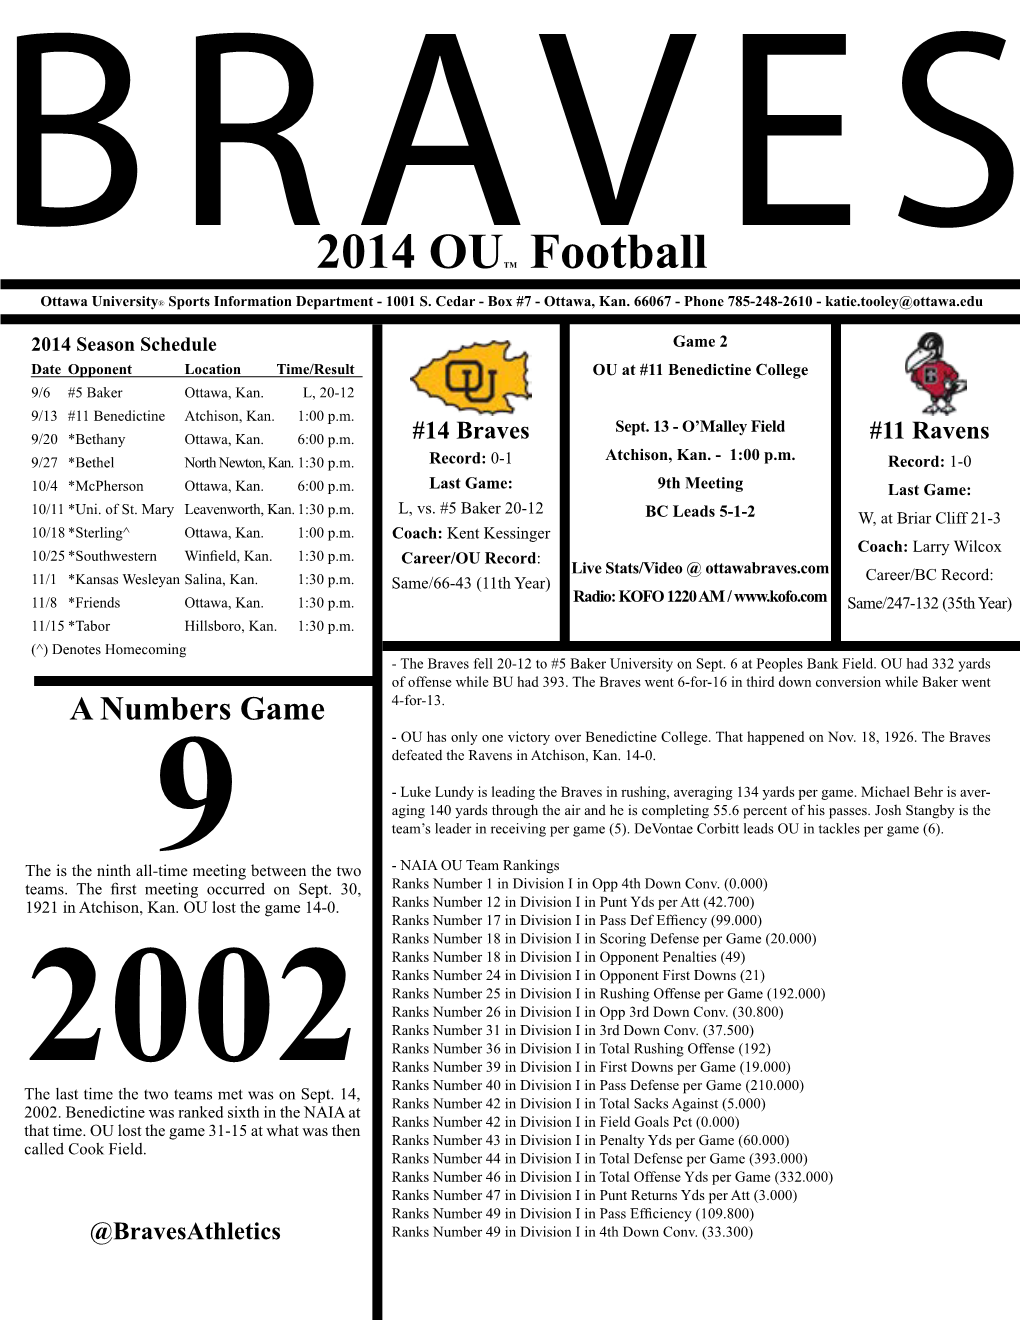 2014 OUTM Football Ottawa University® Sports Information Department - 1001 S